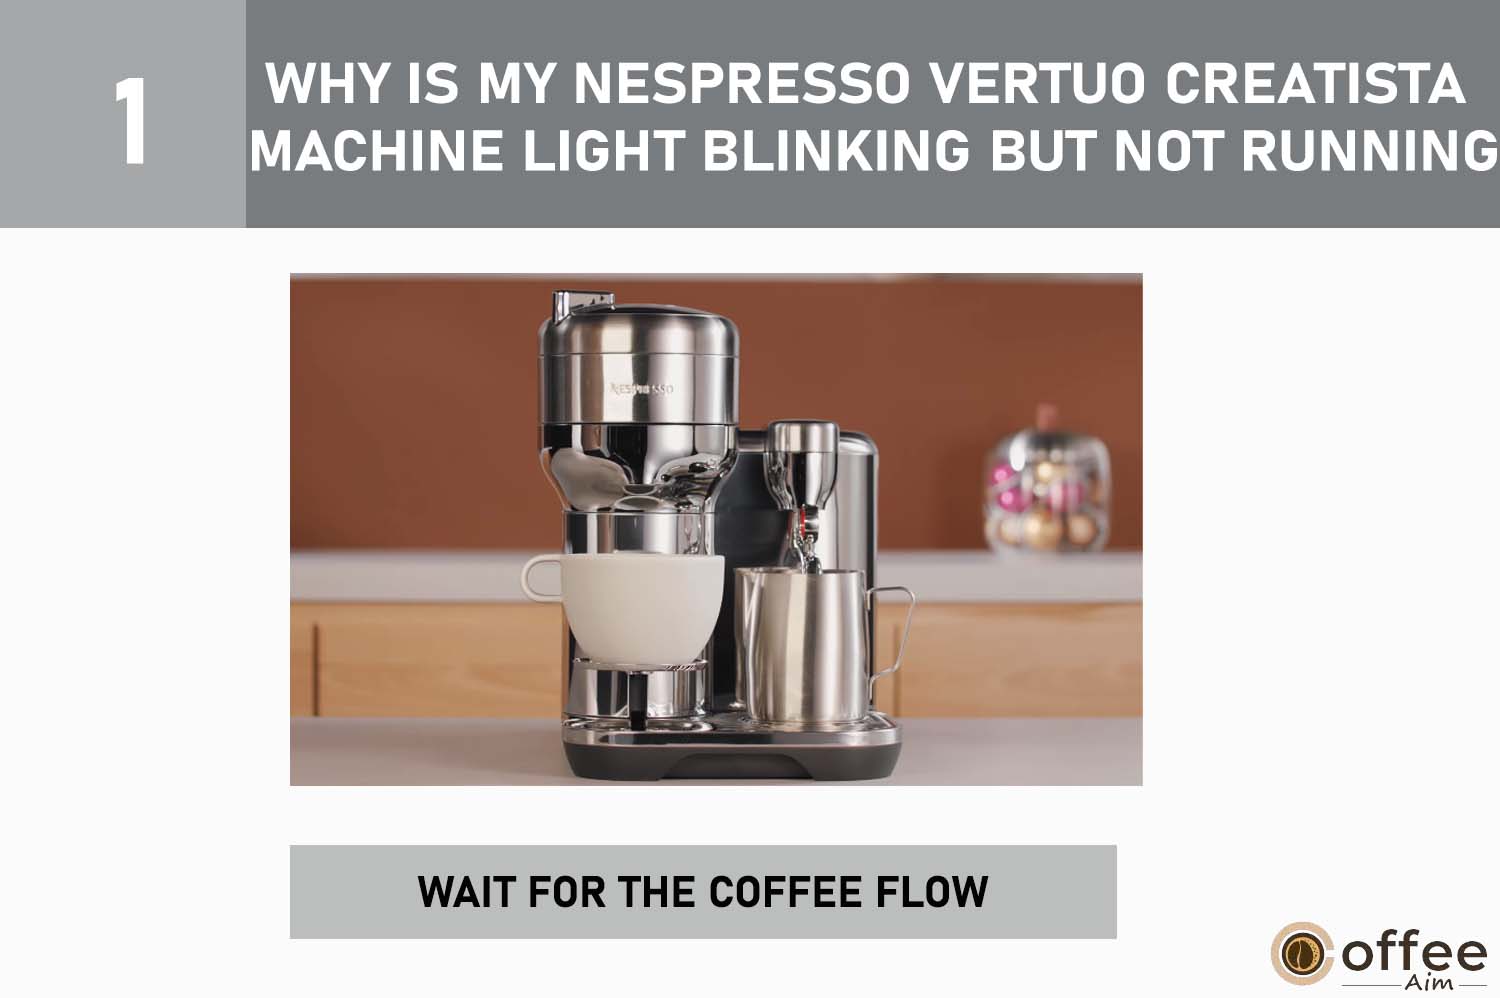 The image illustrates the step-by-step process of waiting for the Nespresso Vertuo Creatista machine to start brewing coffee.